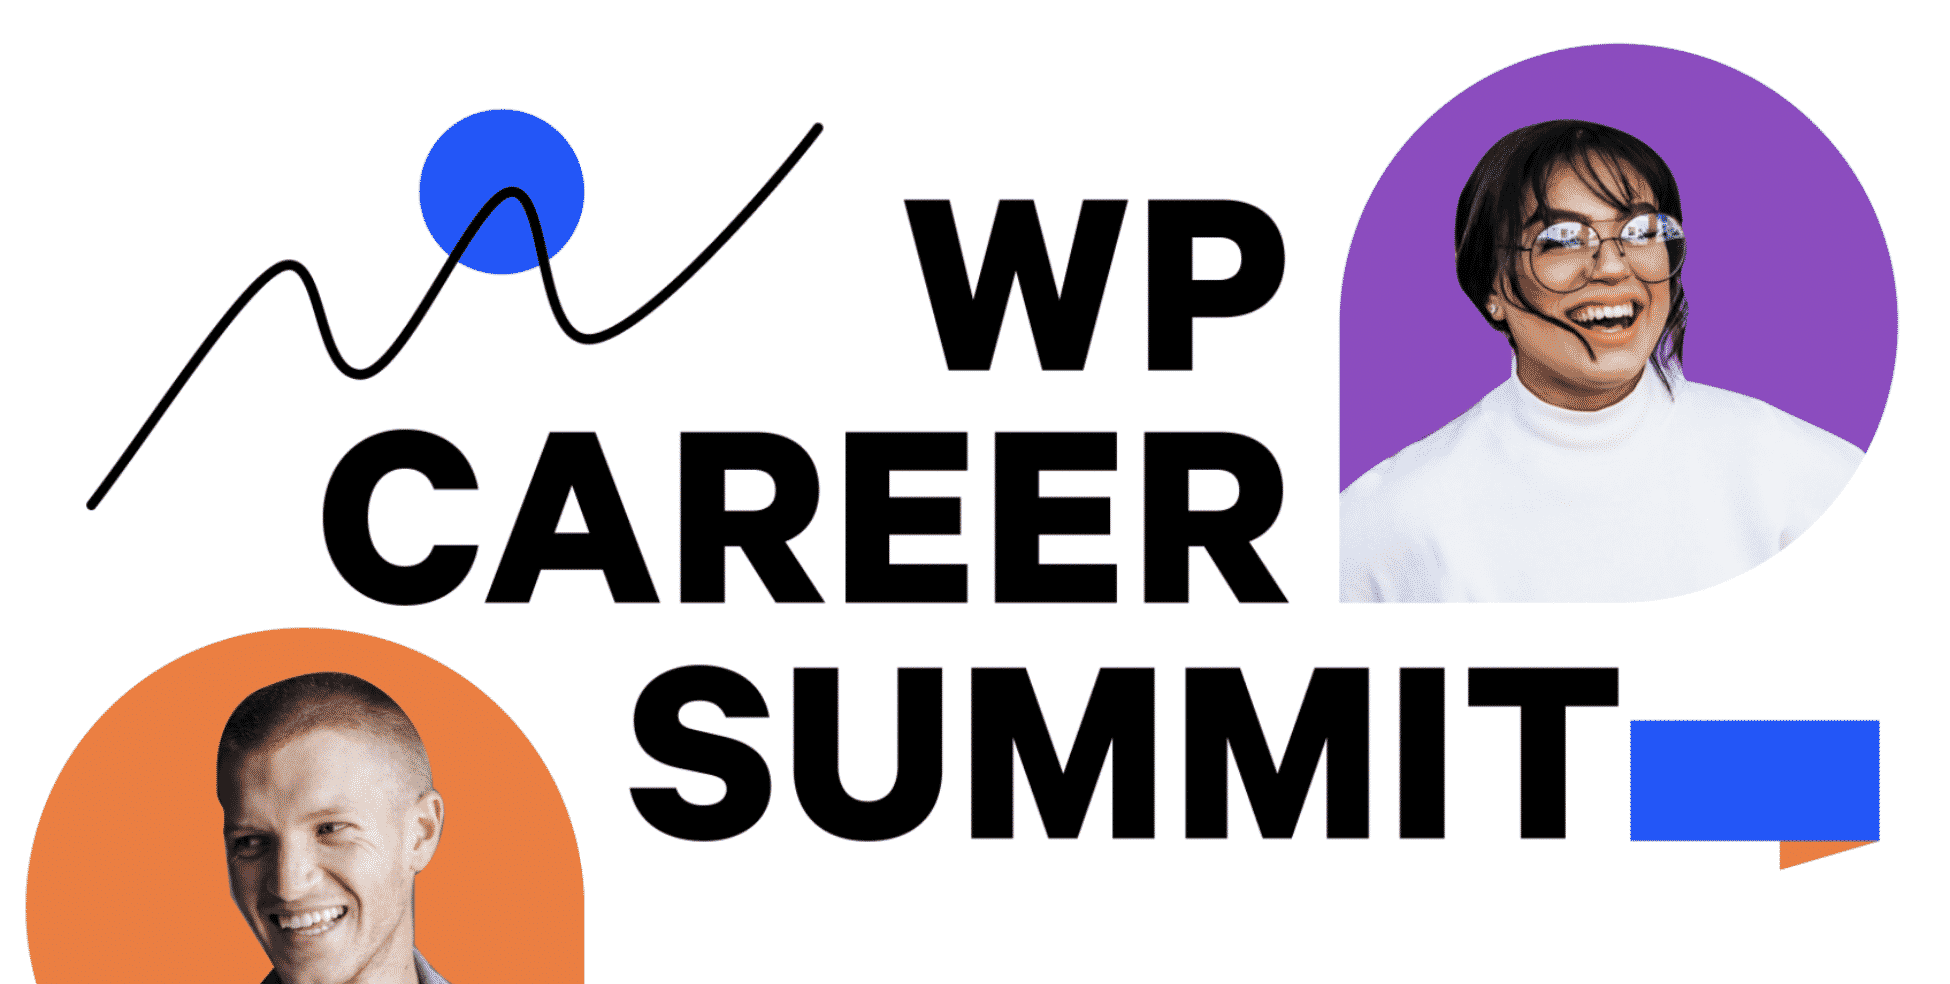 wp-career-summit-opens-registration-calls-for-speakers-and-sponsors WP职业峰会开放注册，征集演讲者和赞助商